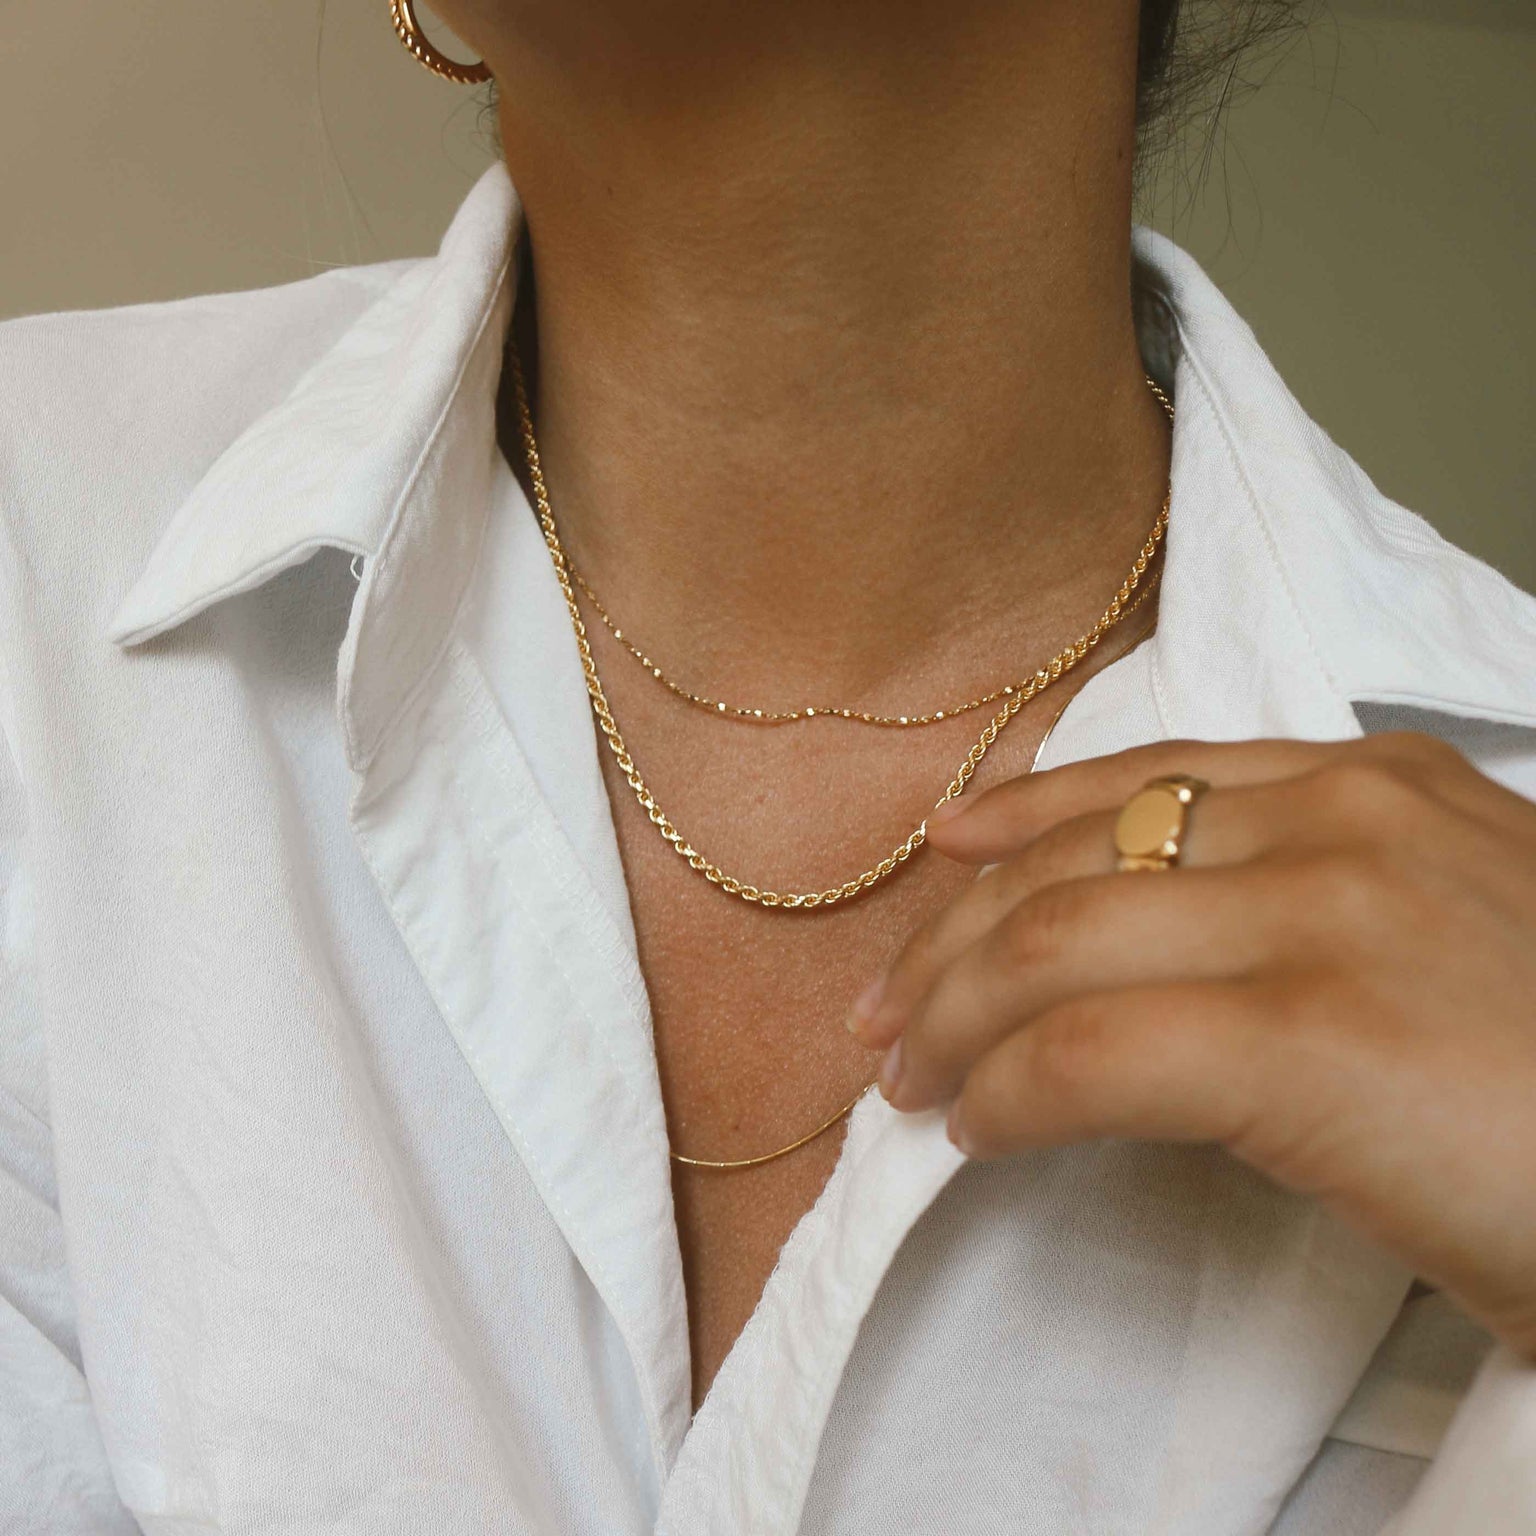 Rope Chain Necklace in Gold worn with gold dainty chain necklaces